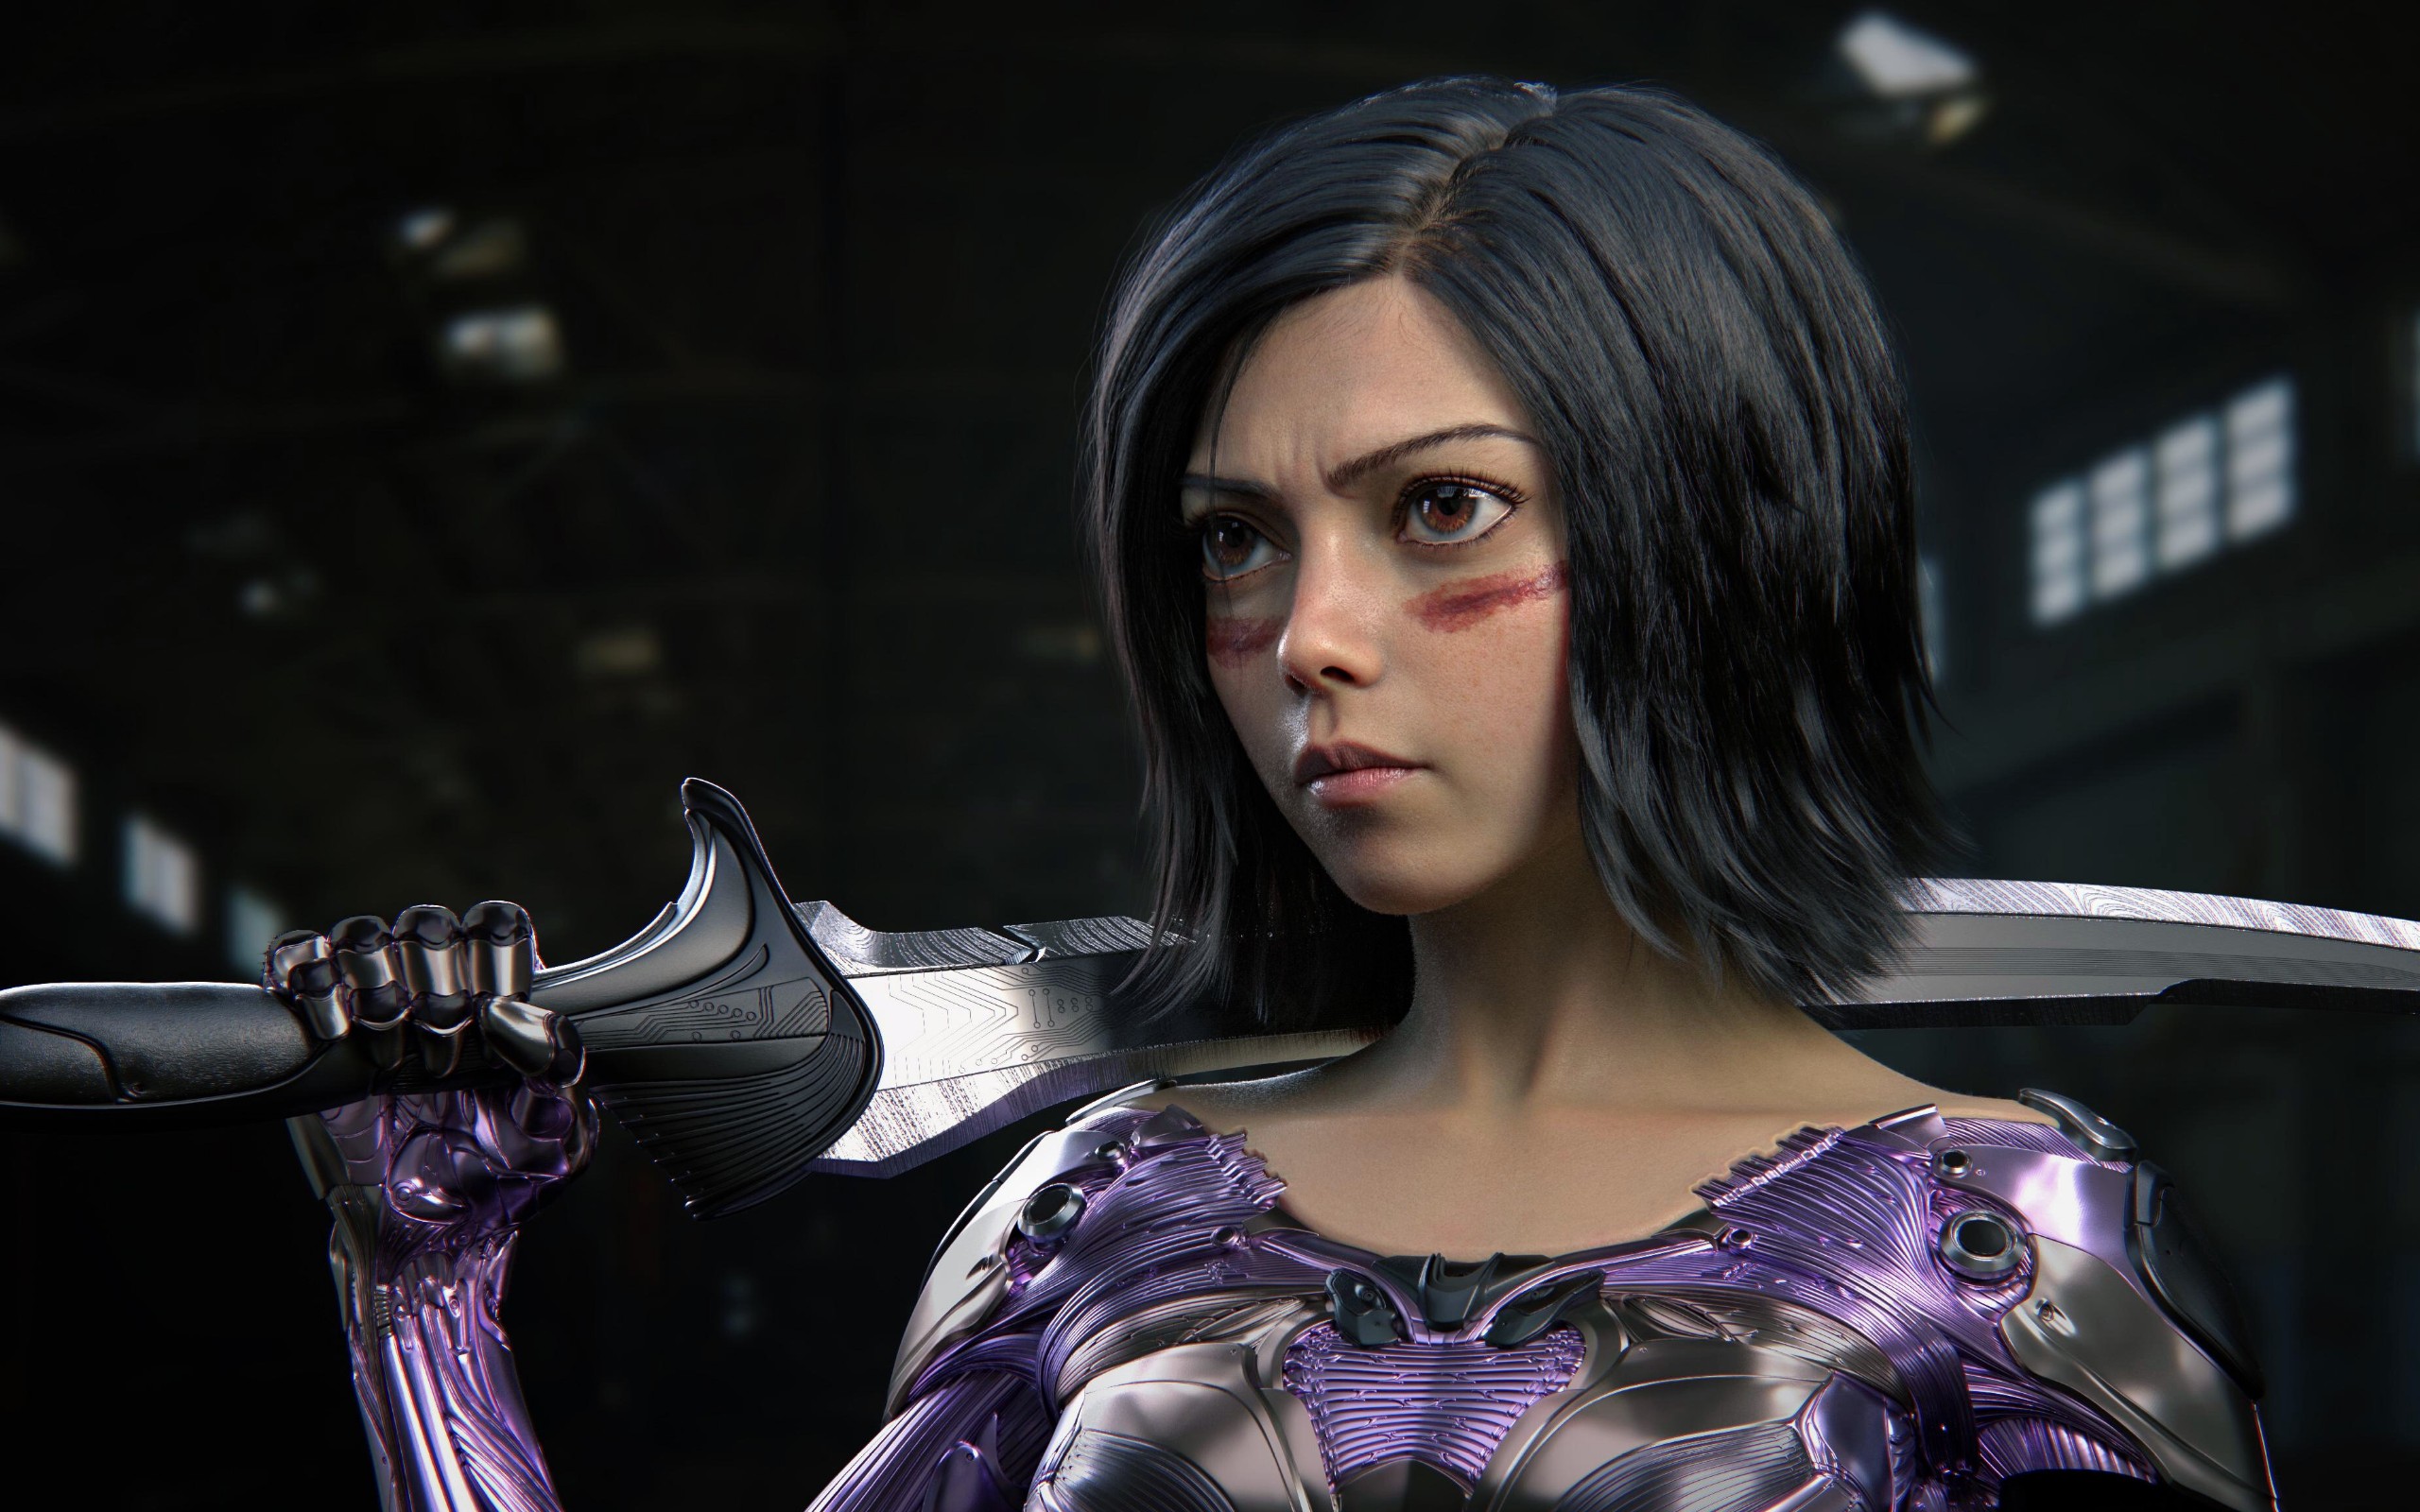 Queen Studios Alita 1:1 Life-size bust by smile _z